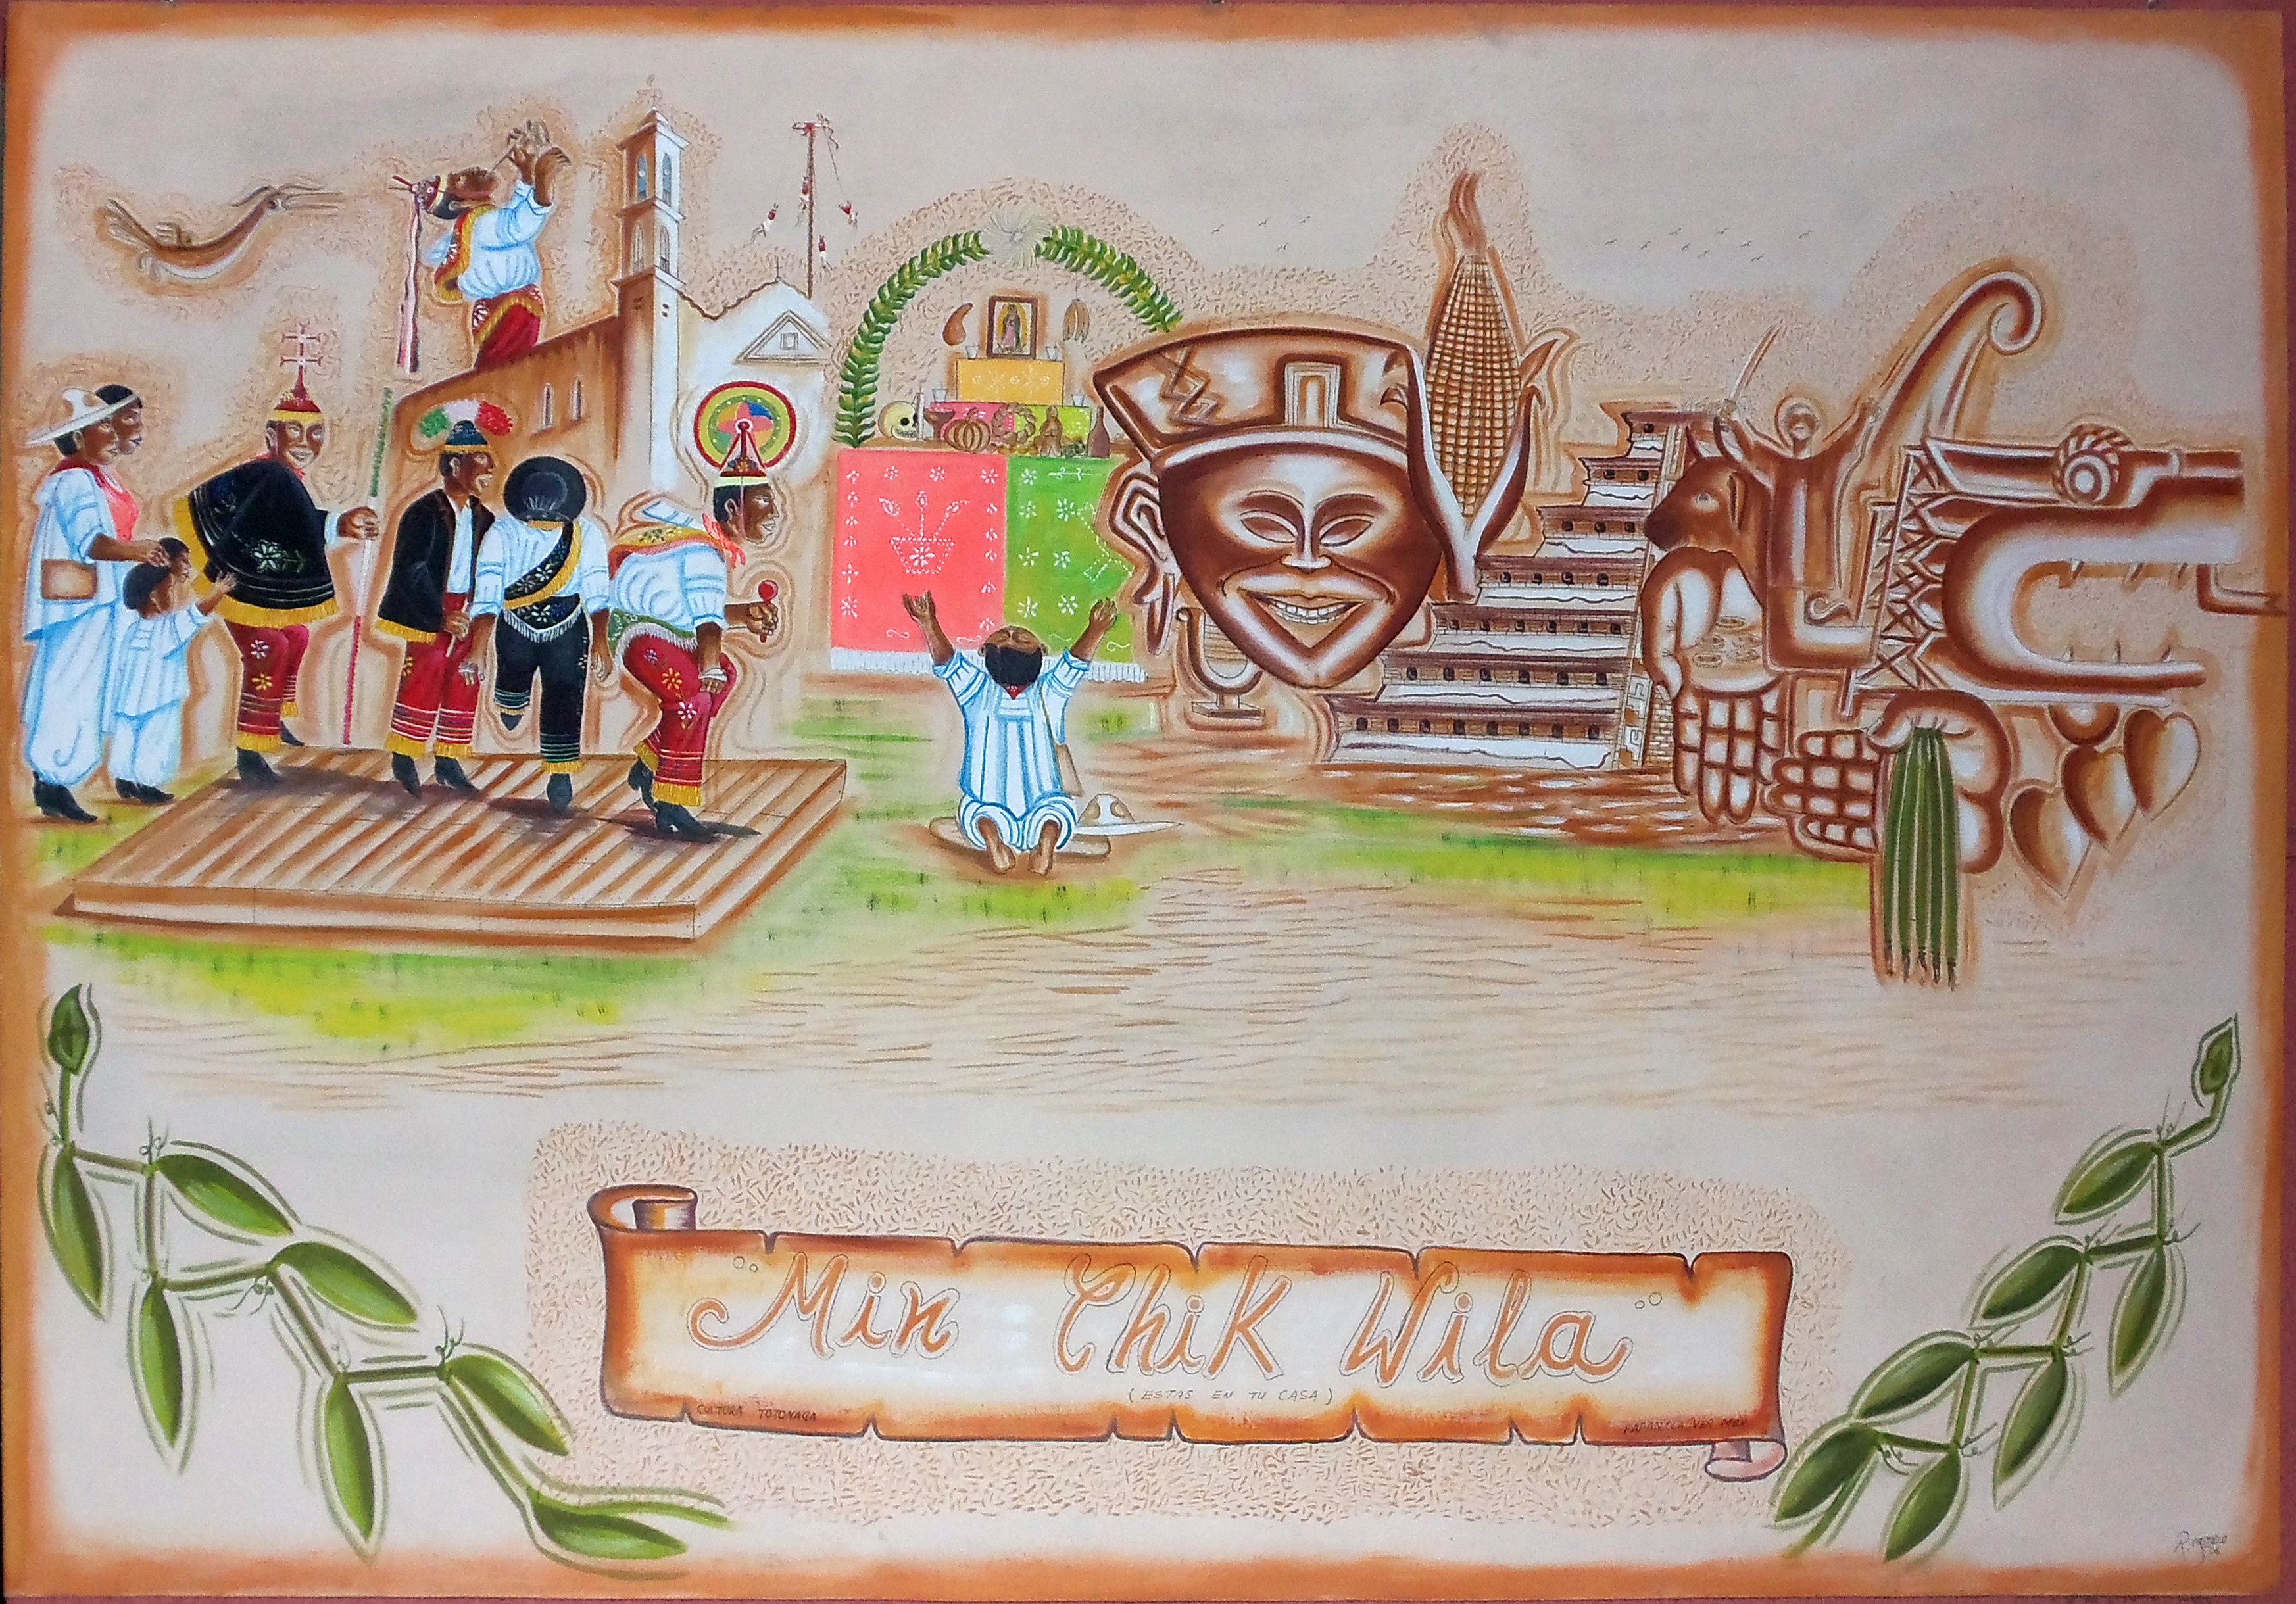 ILLUSTRATION: Welcome to our home illustration, showing vanilla beans in traditional Mayan drawing.